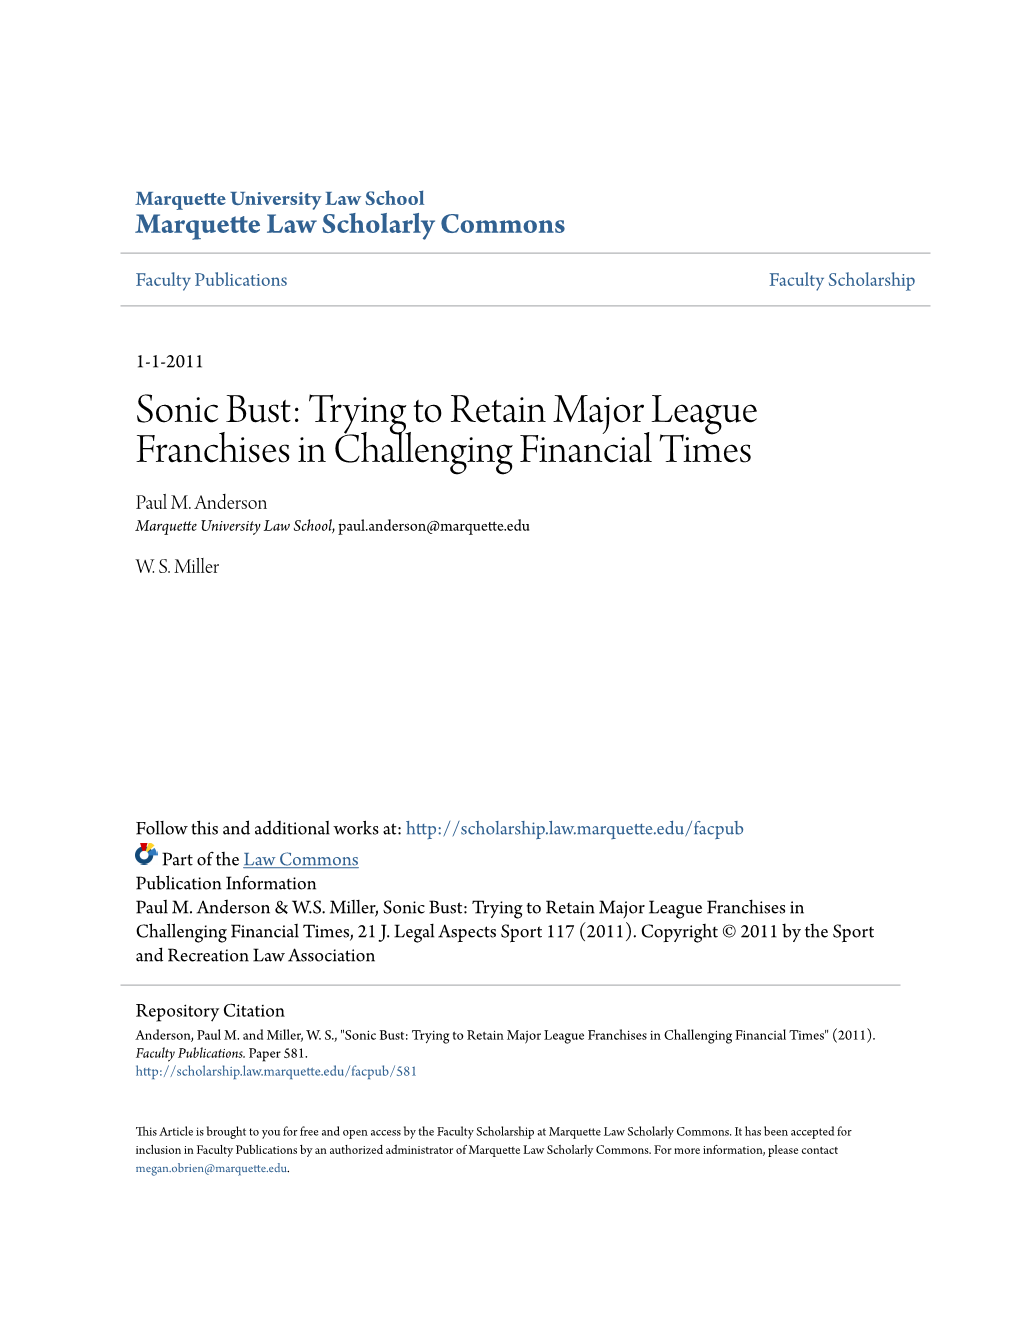 Sonic Bust: Trying to Retain Major League Franchises in Challenging Financial Times Paul M